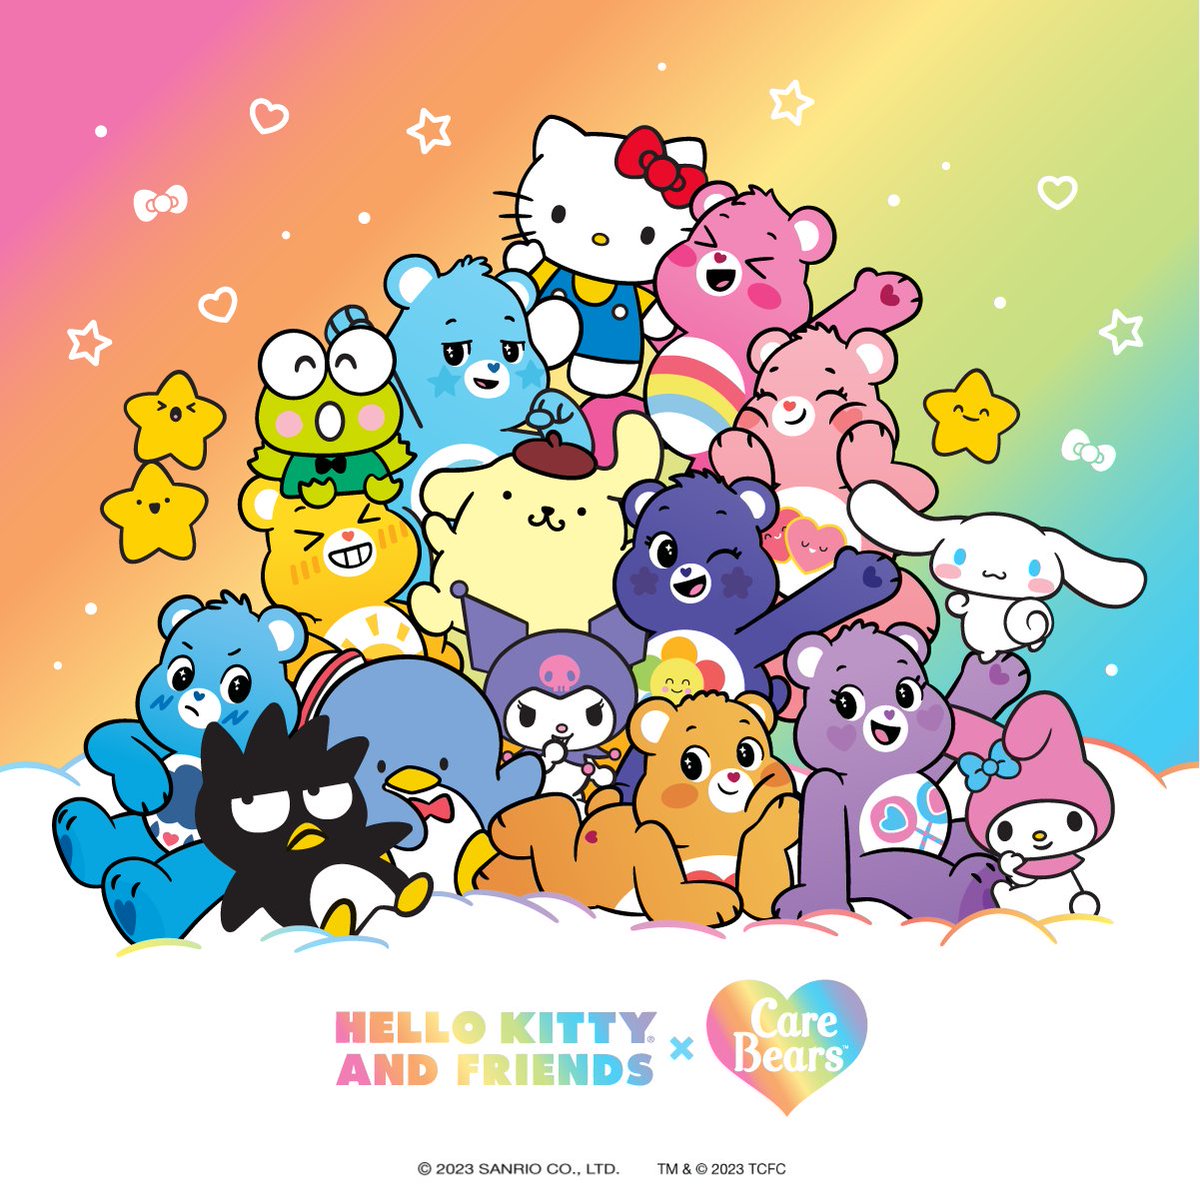 You can never have too many friends 🌈🎀 Hello Kitty and Friends x Care Bears is coming very soon! #HelloKittyxCareBears